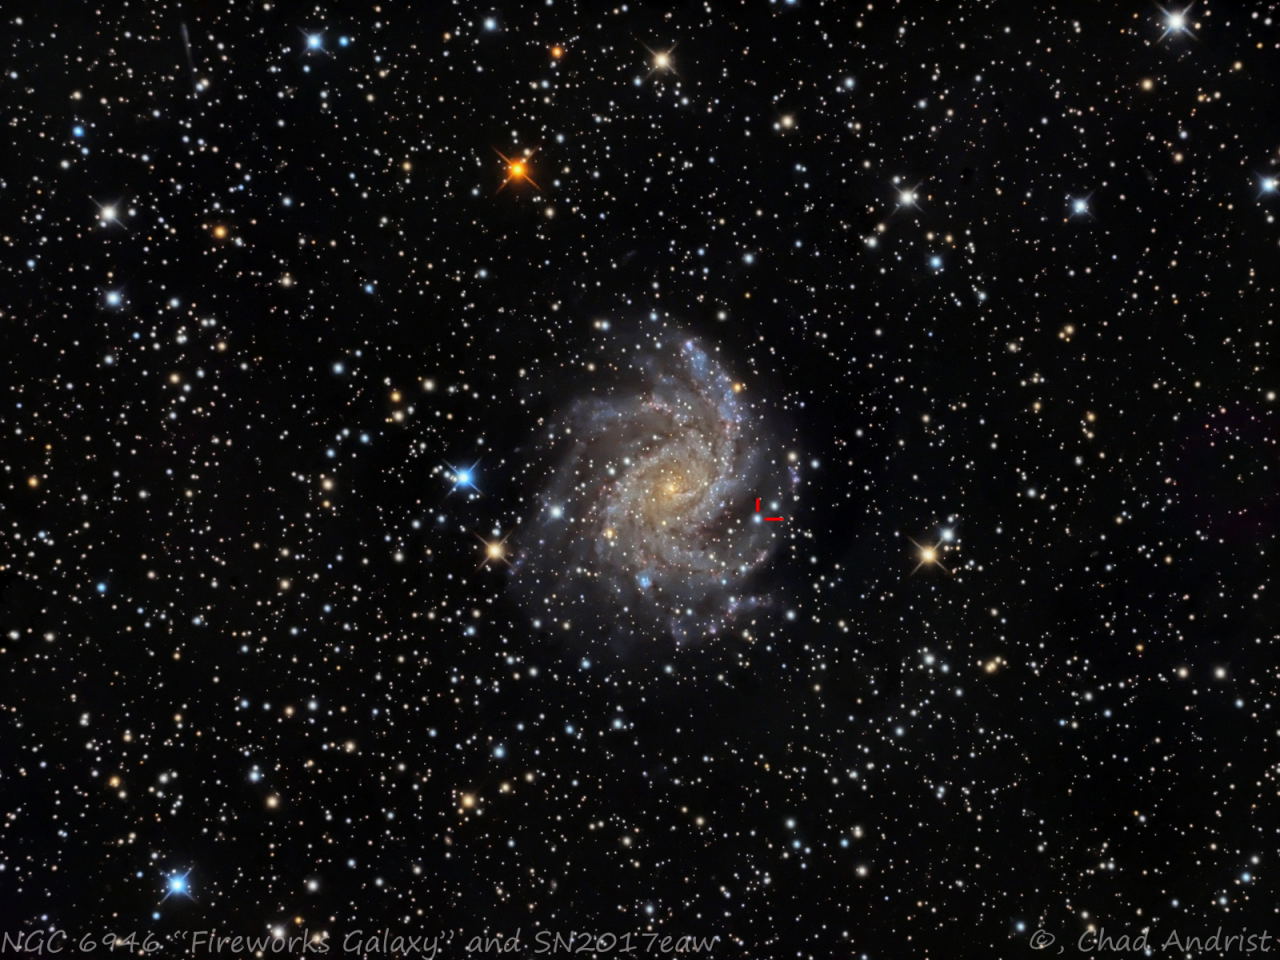 NGC 6946 - Fireworks Galaxy and Supernova SN2017eaw by Chad Andrist 